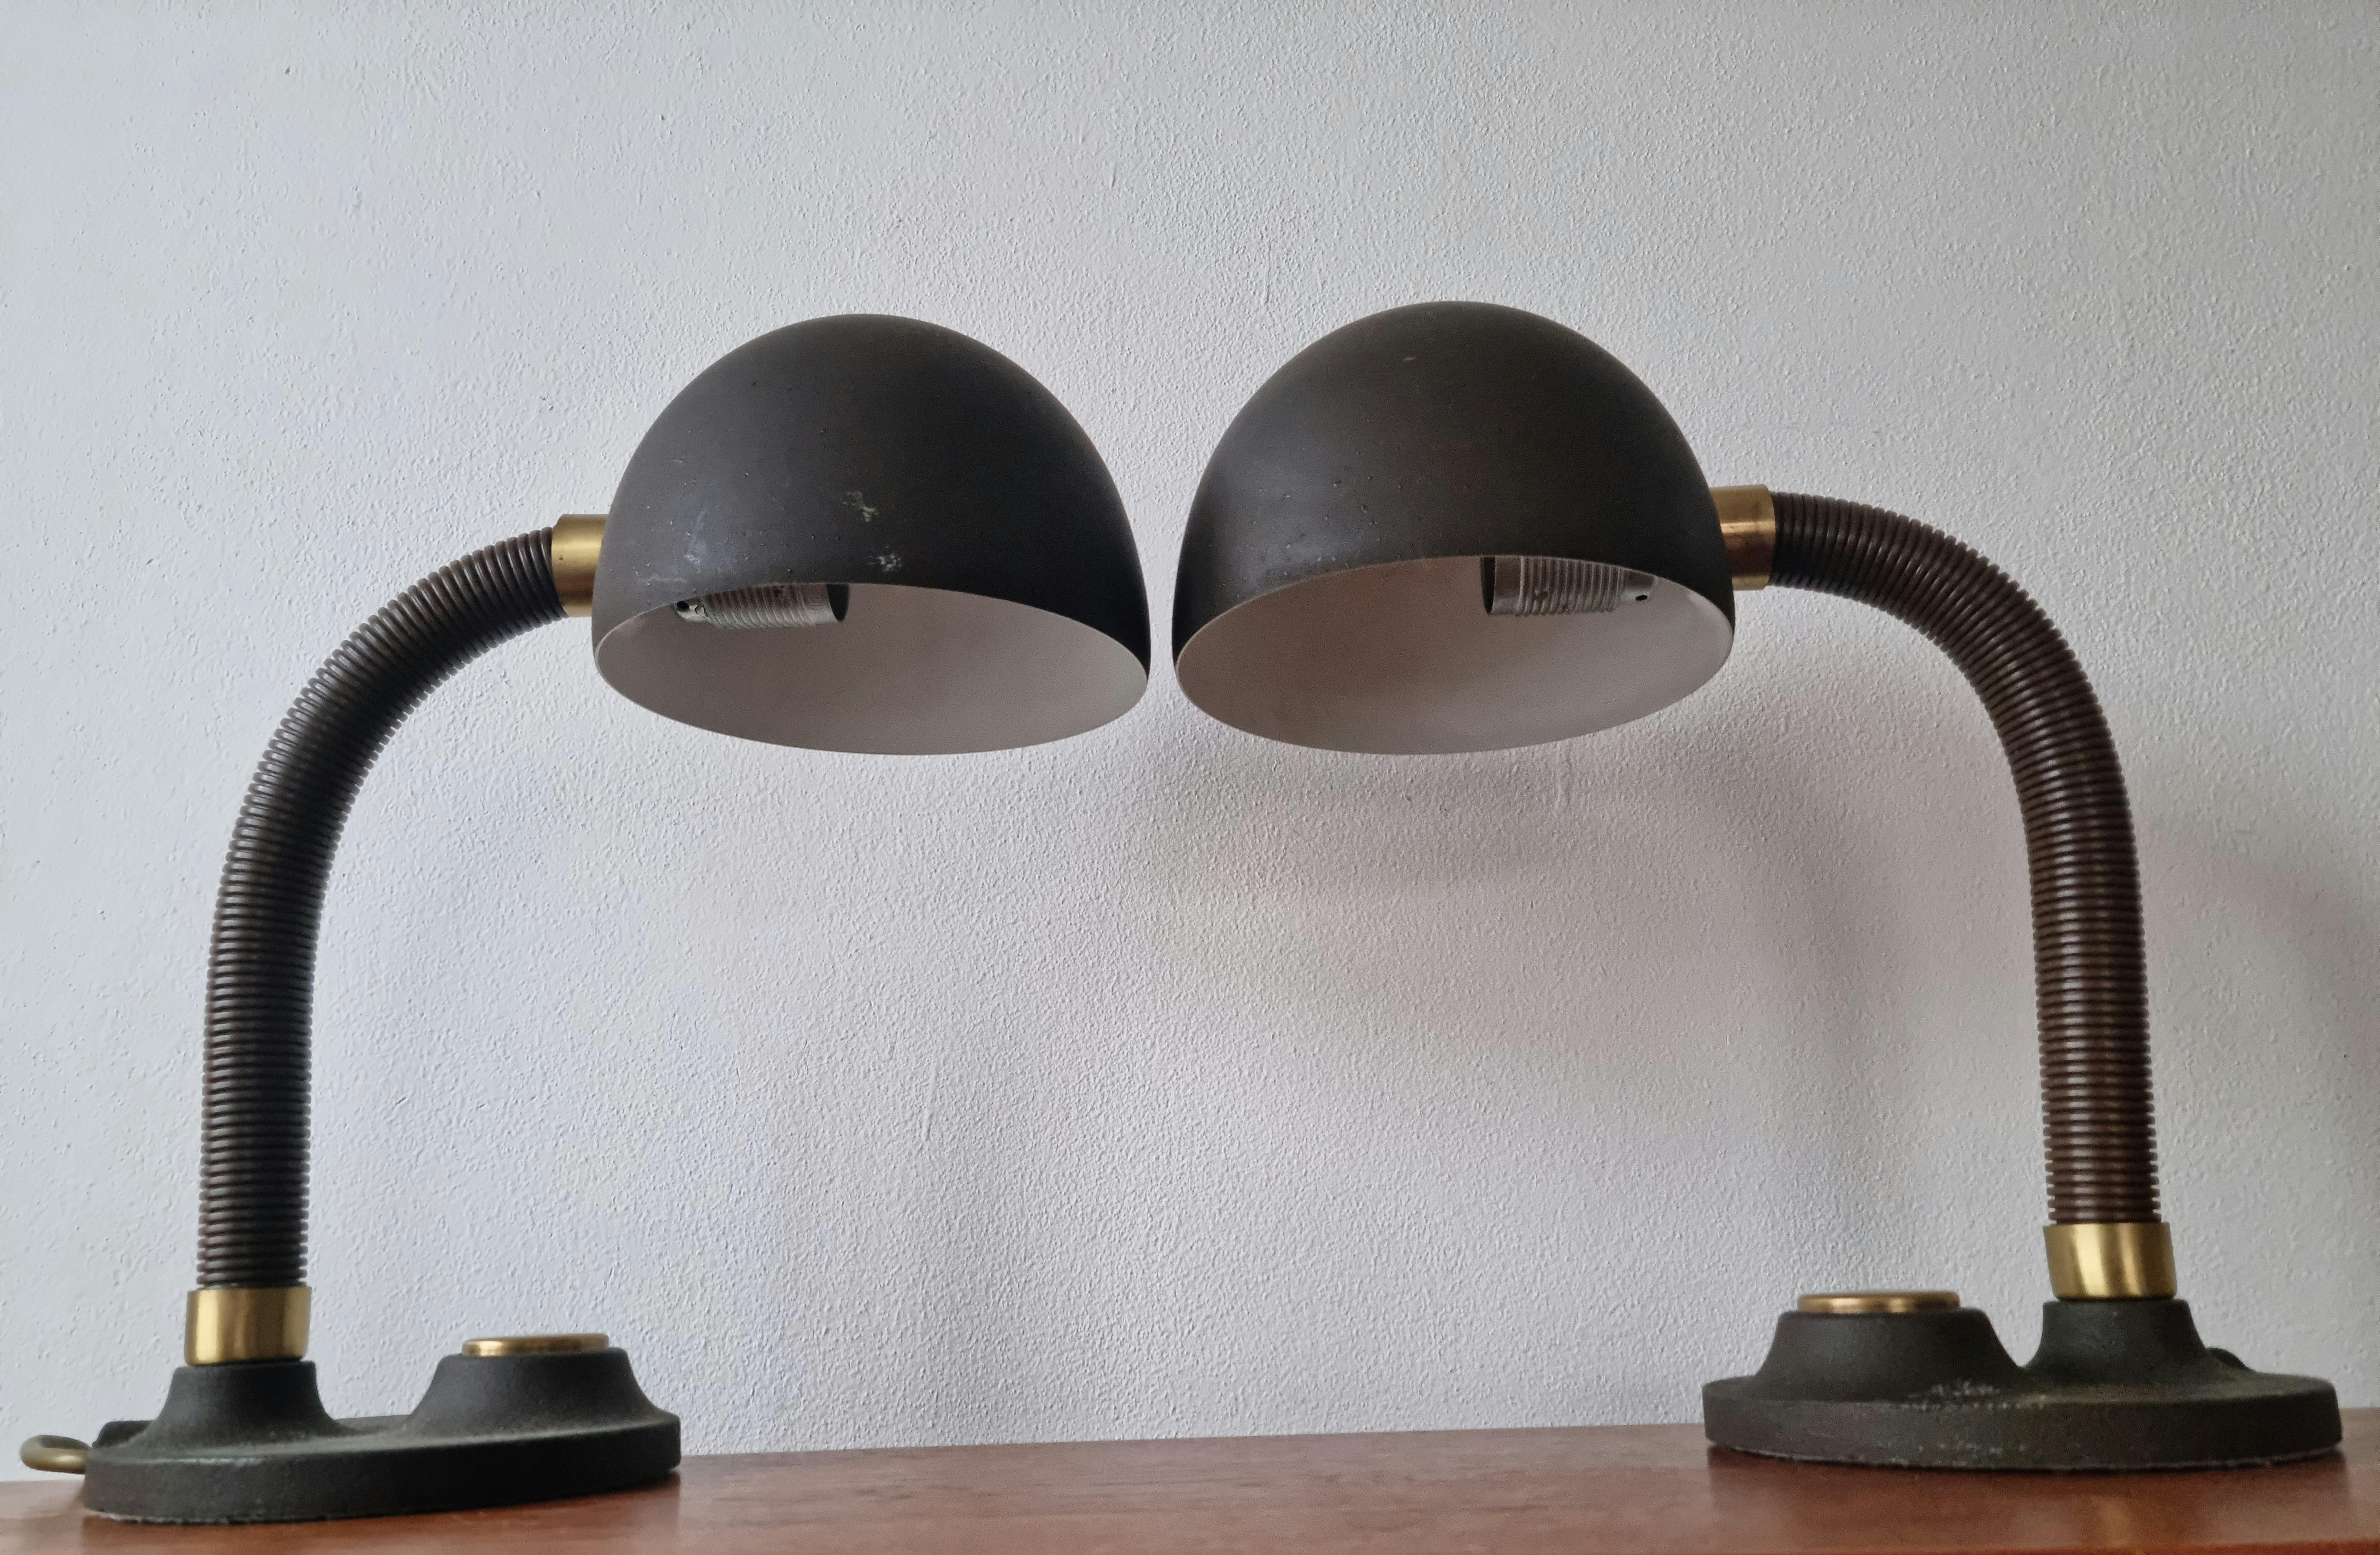 Pair of Midcentury Table Lamps Hillebrand, Germany, 1970s For Sale 1